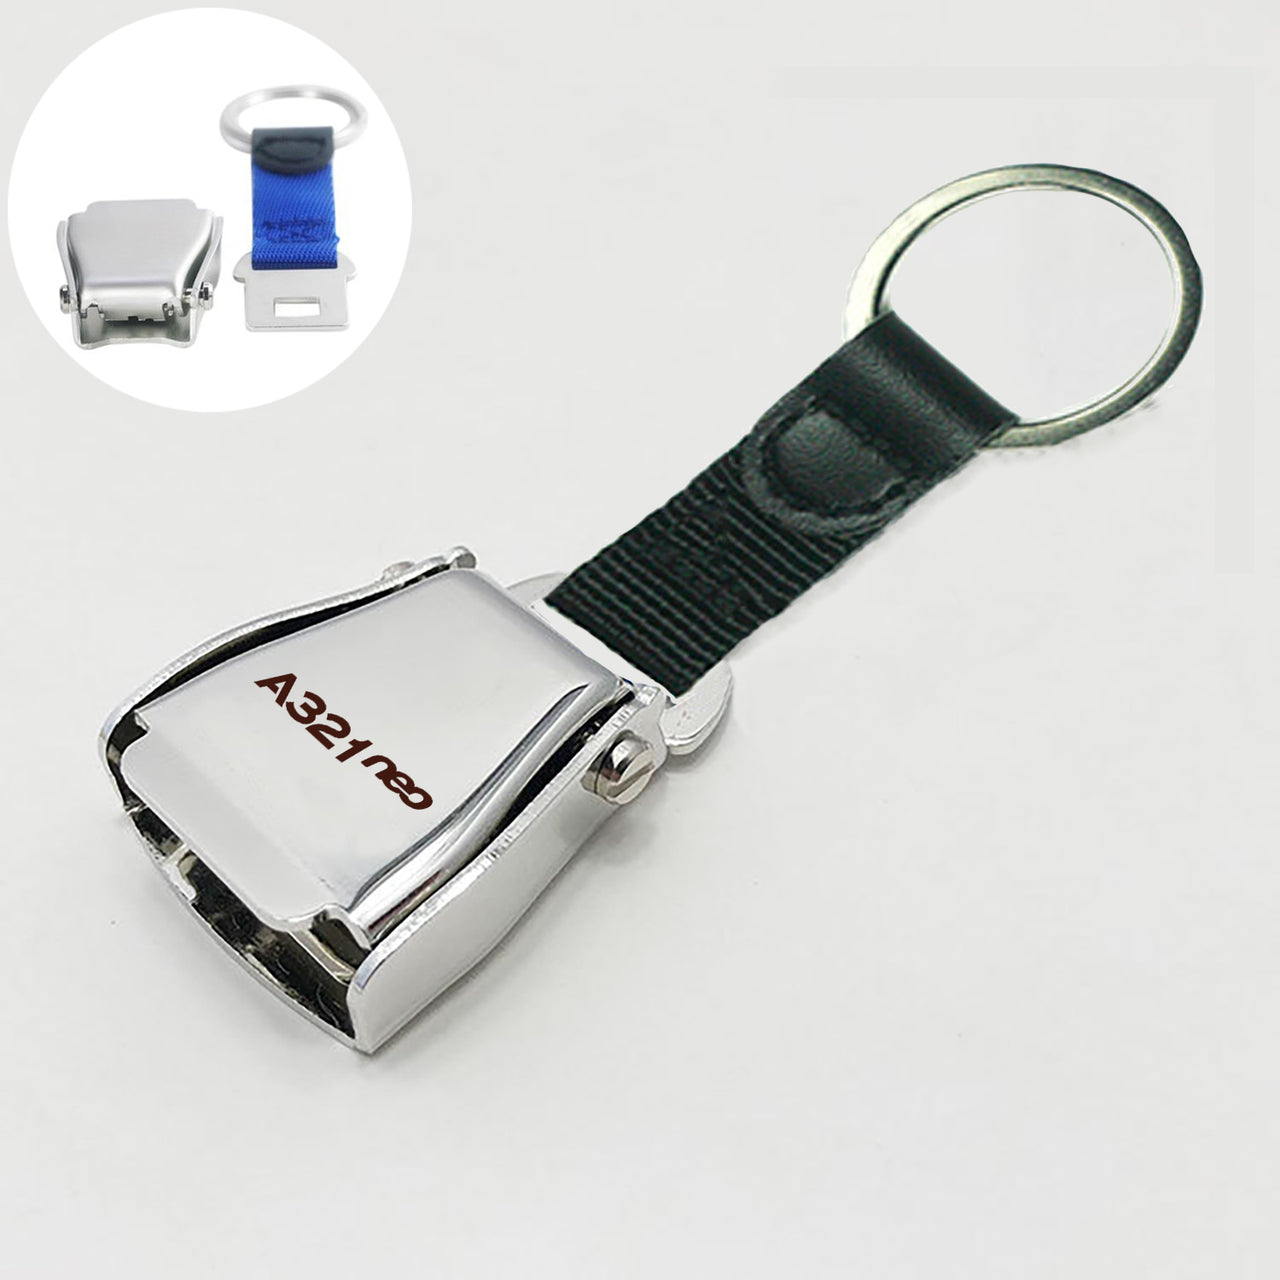 A321neo & Text Designed Airplane Seat Belt Key Chains